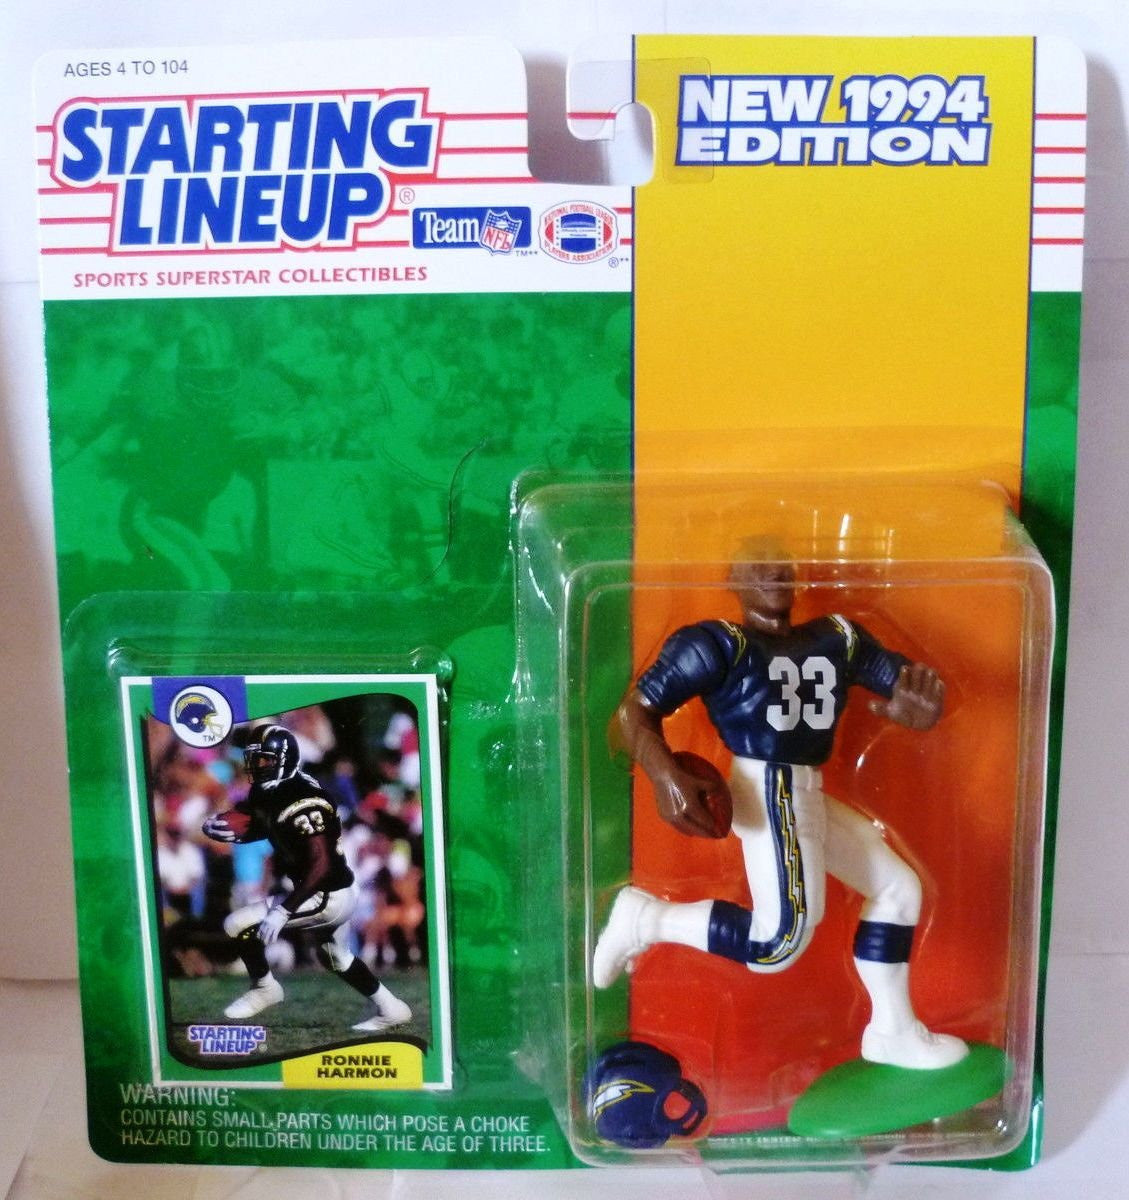 Ronnie Harmon Action Figure of the San Diego Chargers - 1994 Starting Lineup NFL Sports Superstar Collectibles